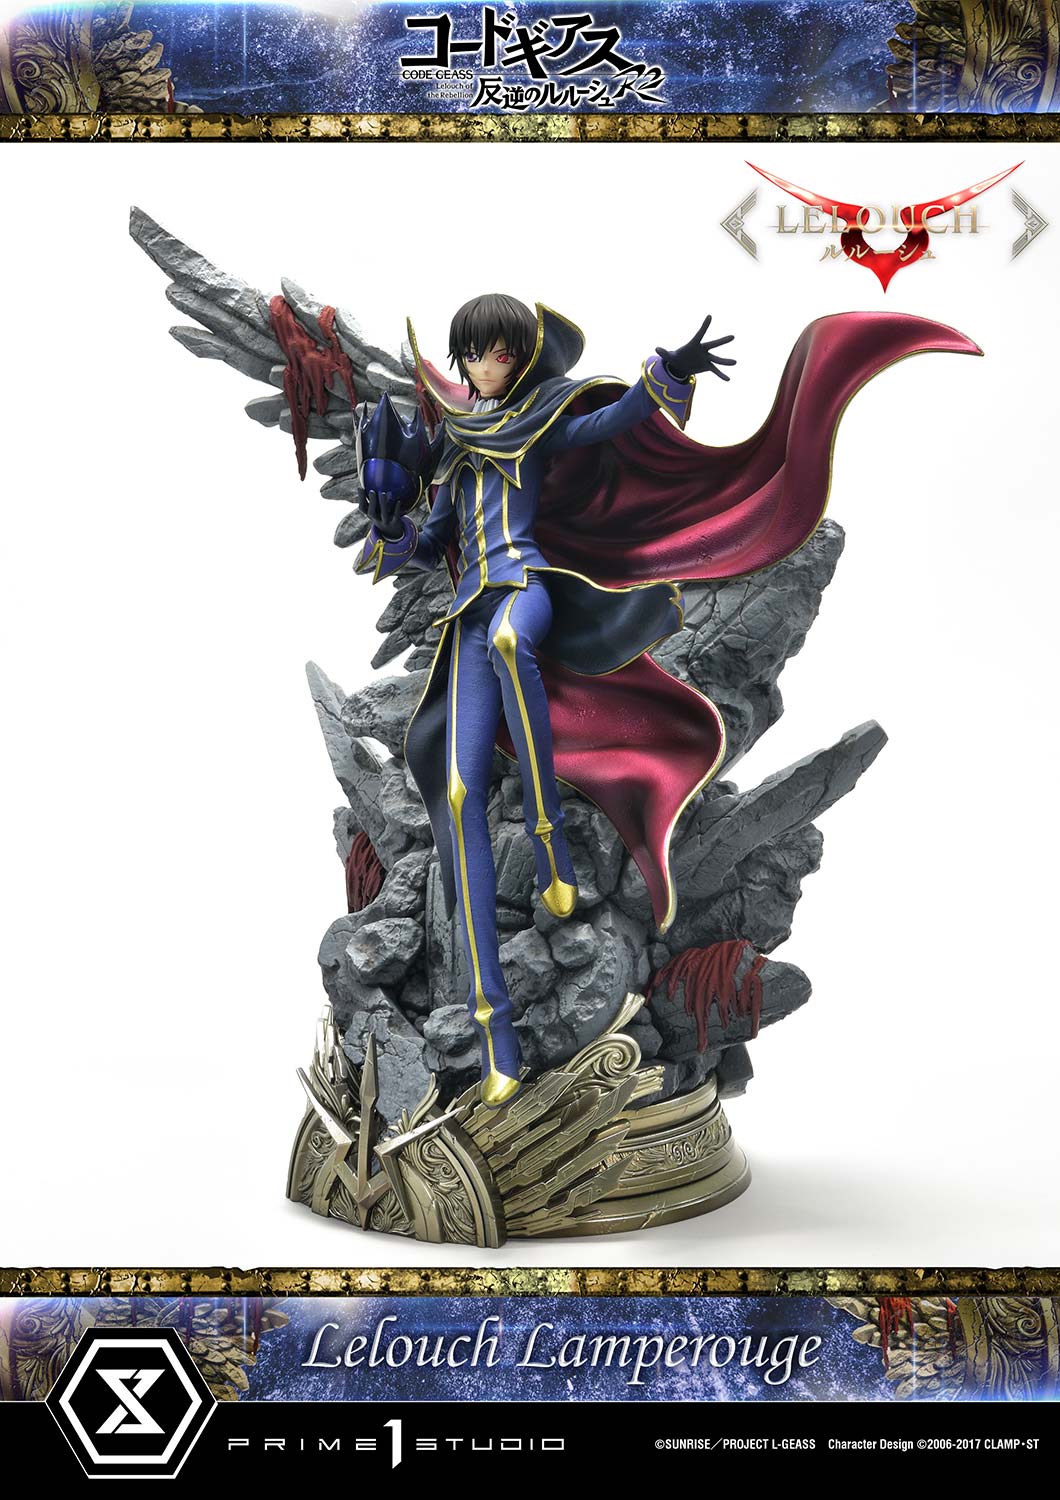 Concept Master Line Code Geass Lelouch of the Rebellion R2 Lelouch Lamperouge 1/6 Complete Figure | animota